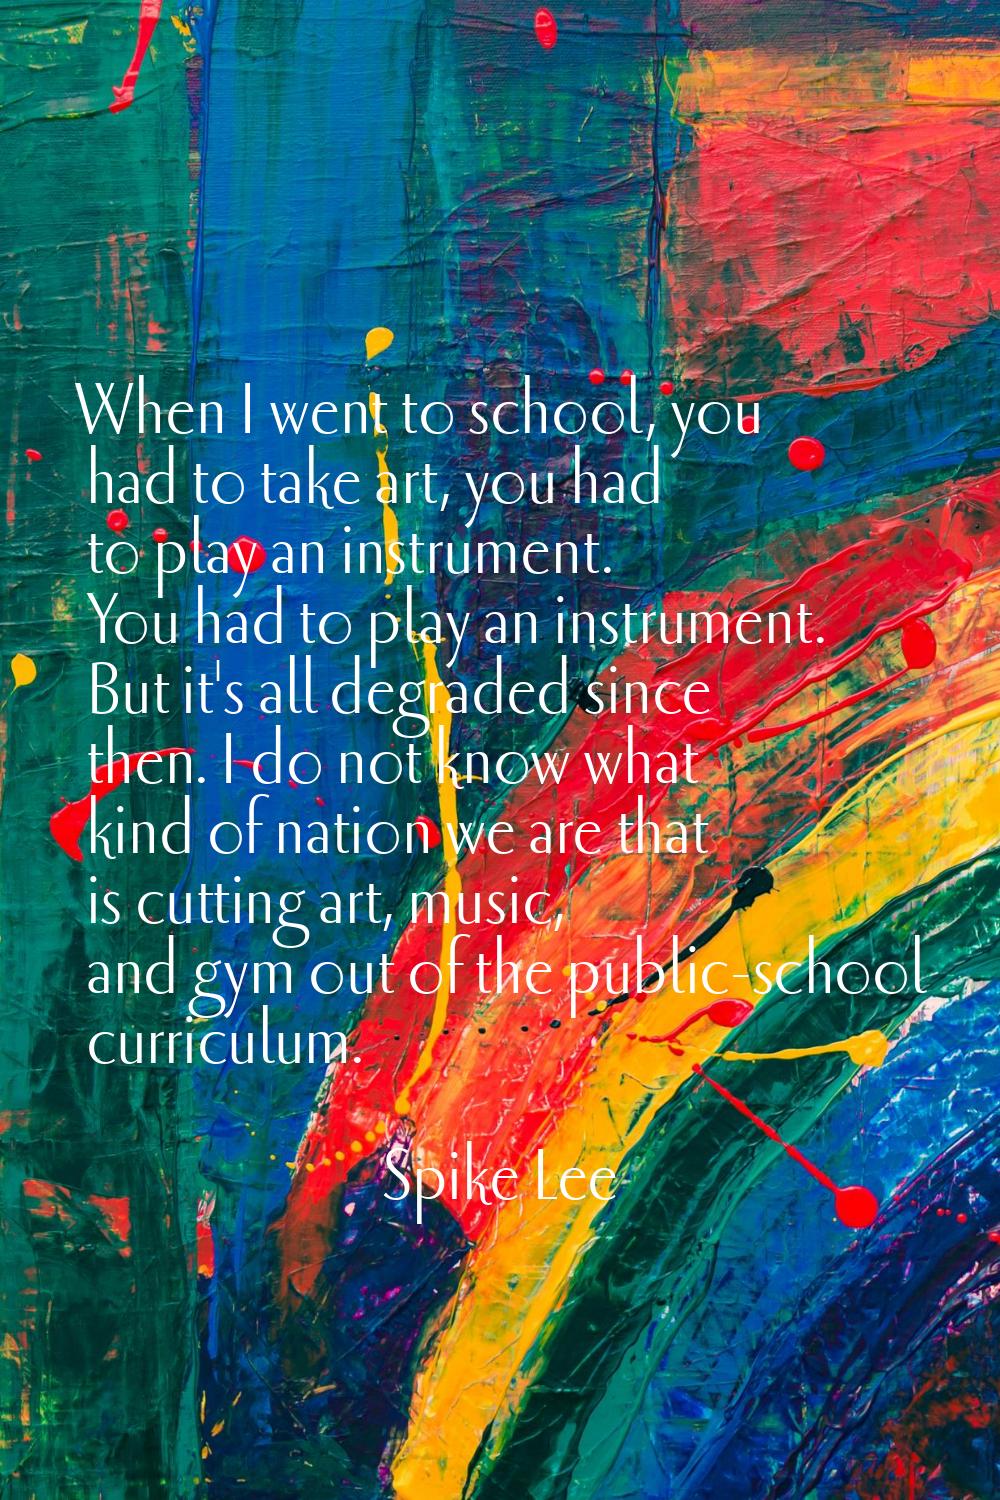 When I went to school, you had to take art, you had to play an instrument. You had to play an instr